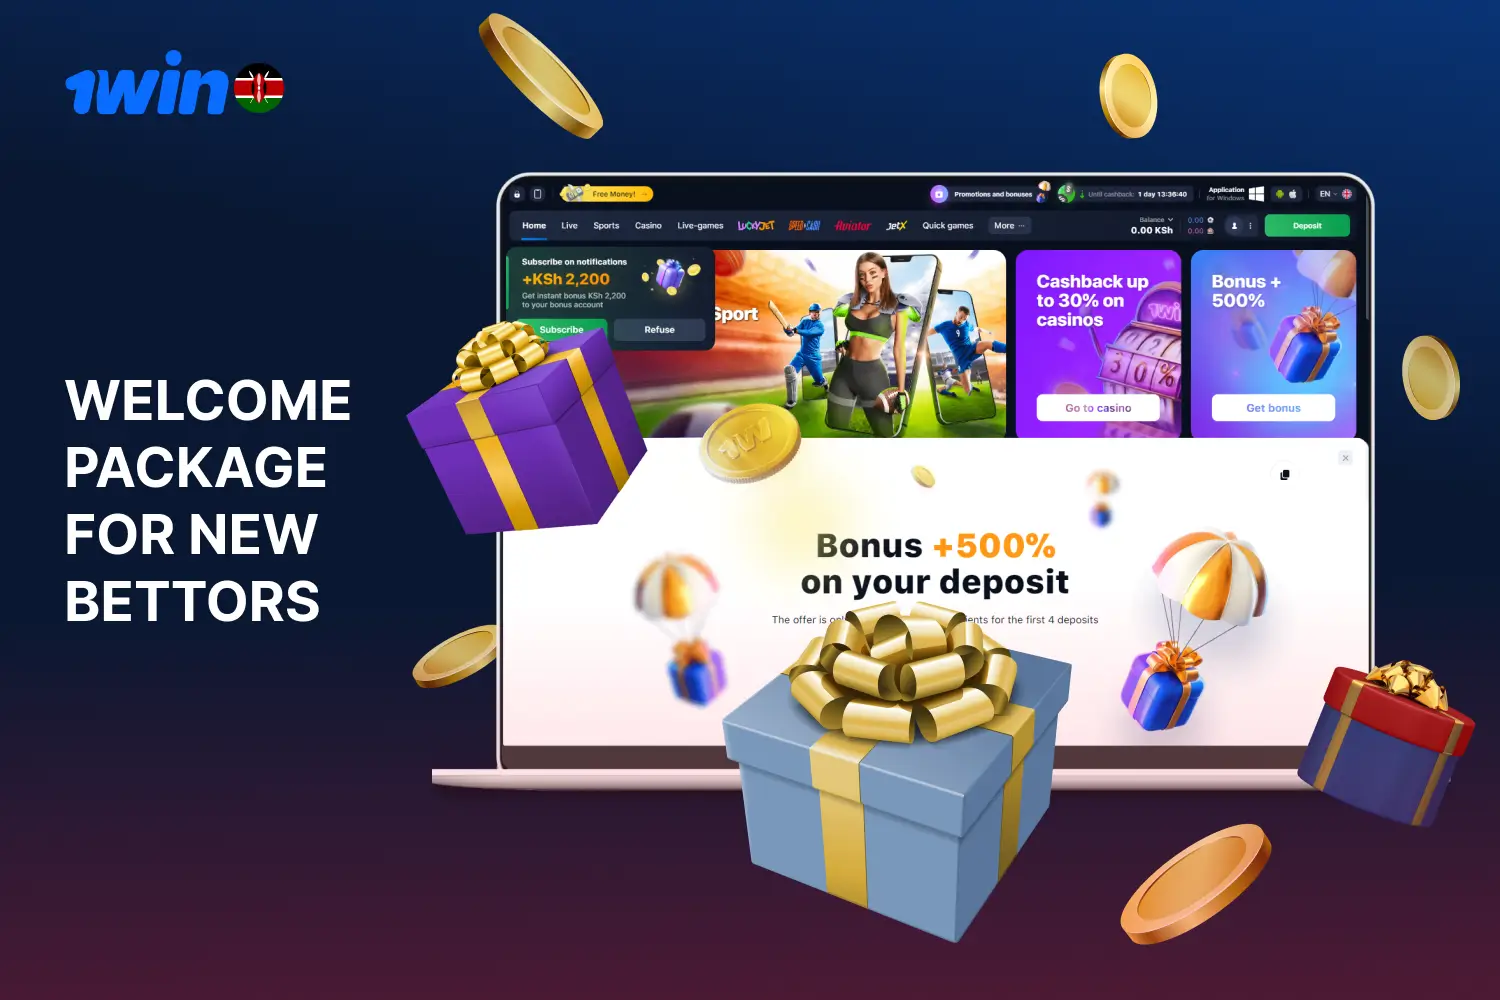 1win is offering a welcome bonus package to new registered bettors from Kenya